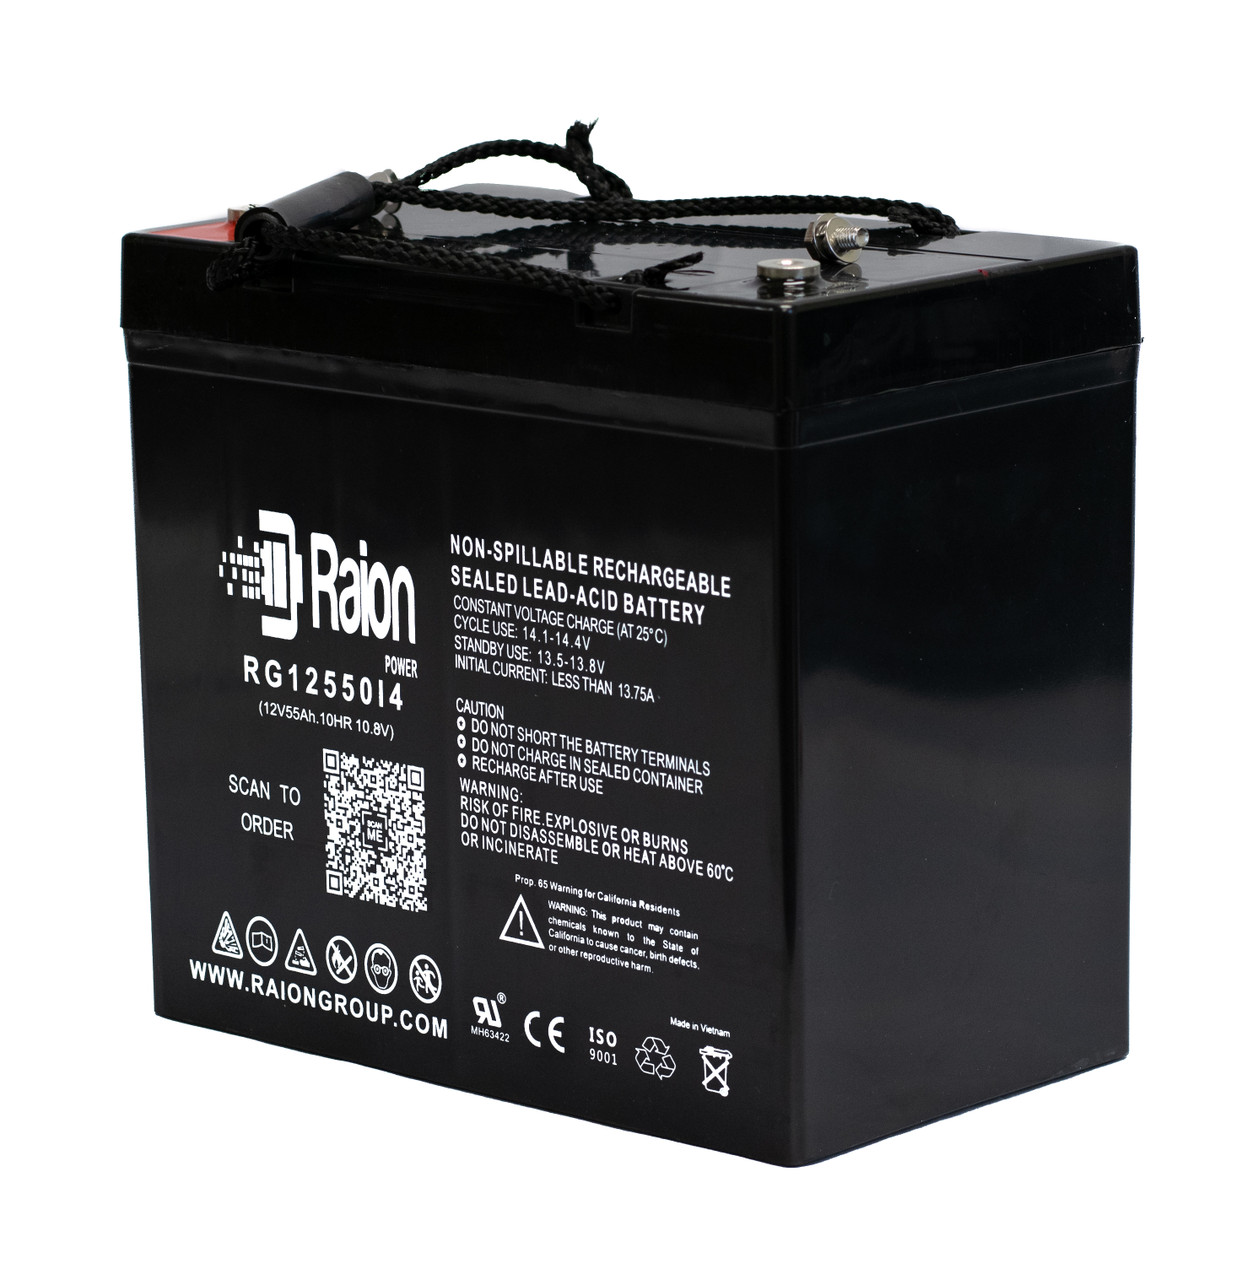 Raion Power 12V 55Ah 22NF Mobility Scooter Battery Replacement for Chauffeur Mobility Chauffeur Scooters C-Series